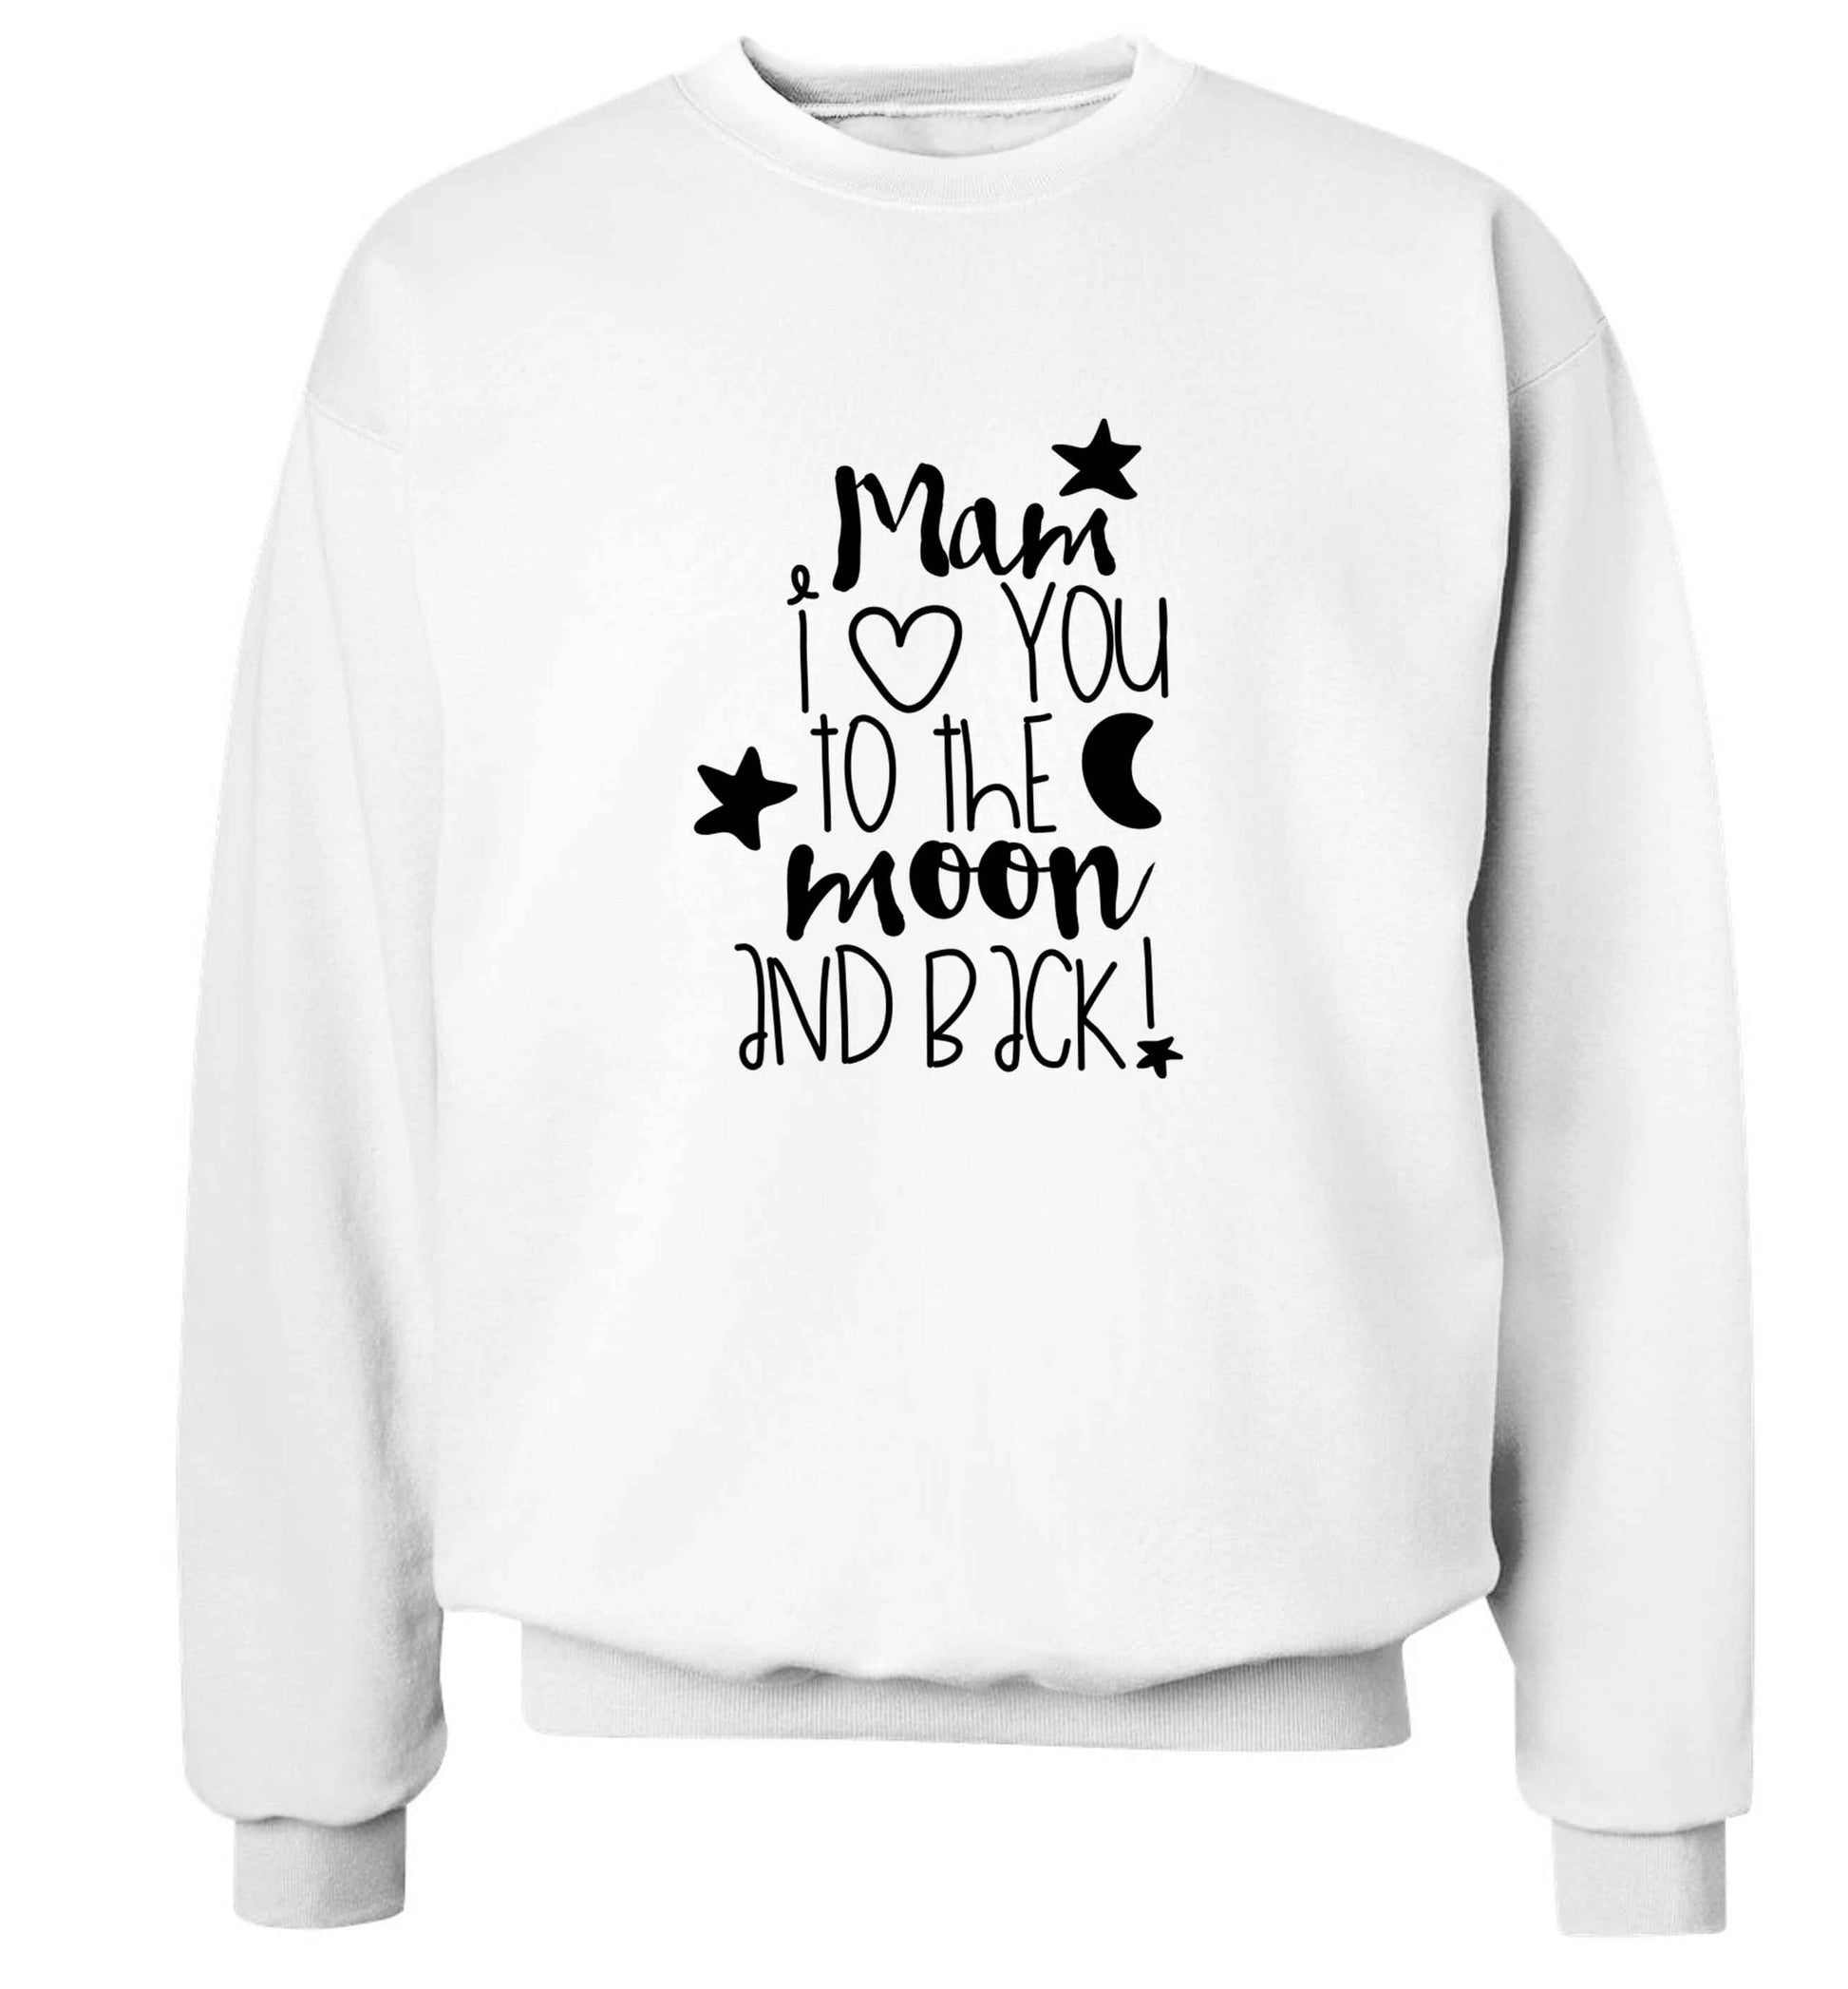 Mam I love you to the moon and back adult's unisex white sweater 2XL